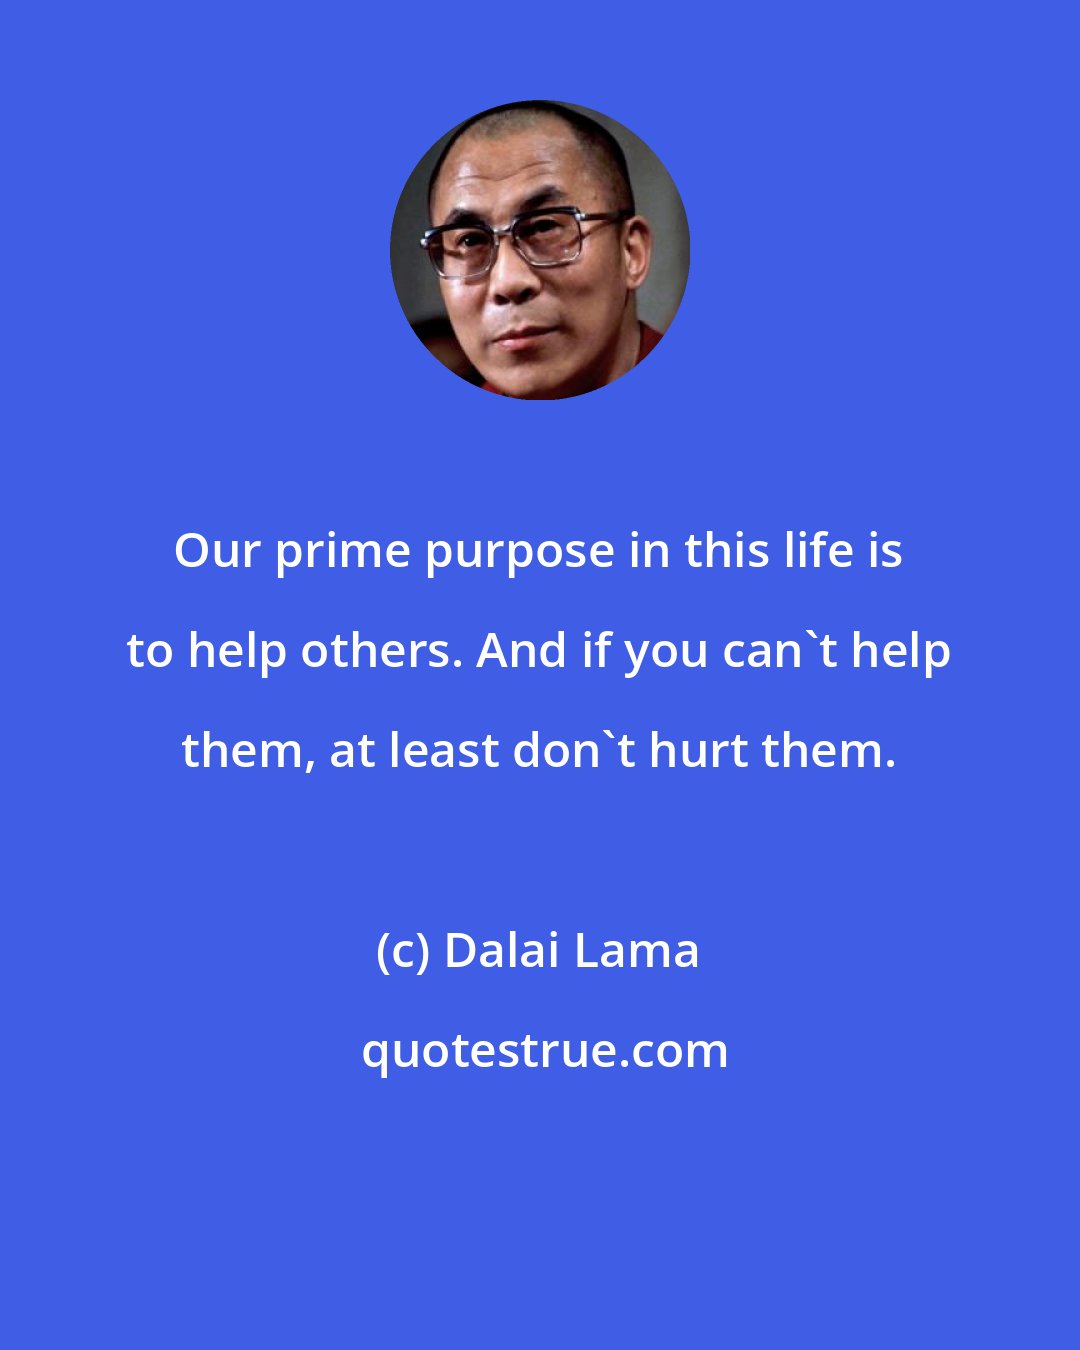 Dalai Lama: Our prime purpose in this life is to help others. And if you can't help them, at least don't hurt them.